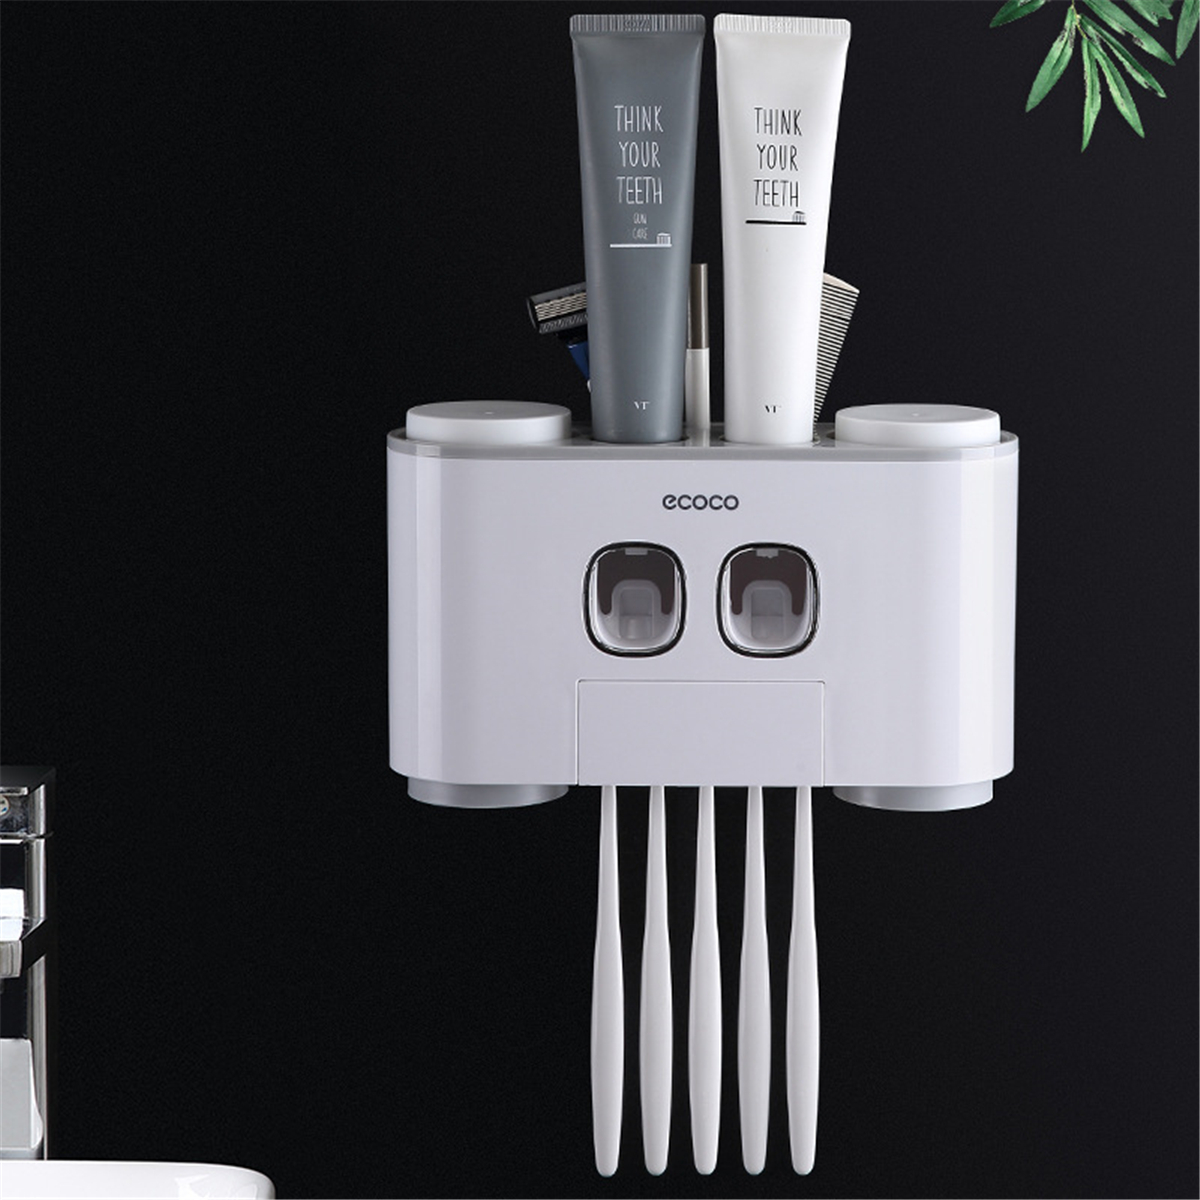 

Automatic Toothpaste Squeezer Dispenser 5 Toothbrush Holder Wall Mount Stand Set Bathroom